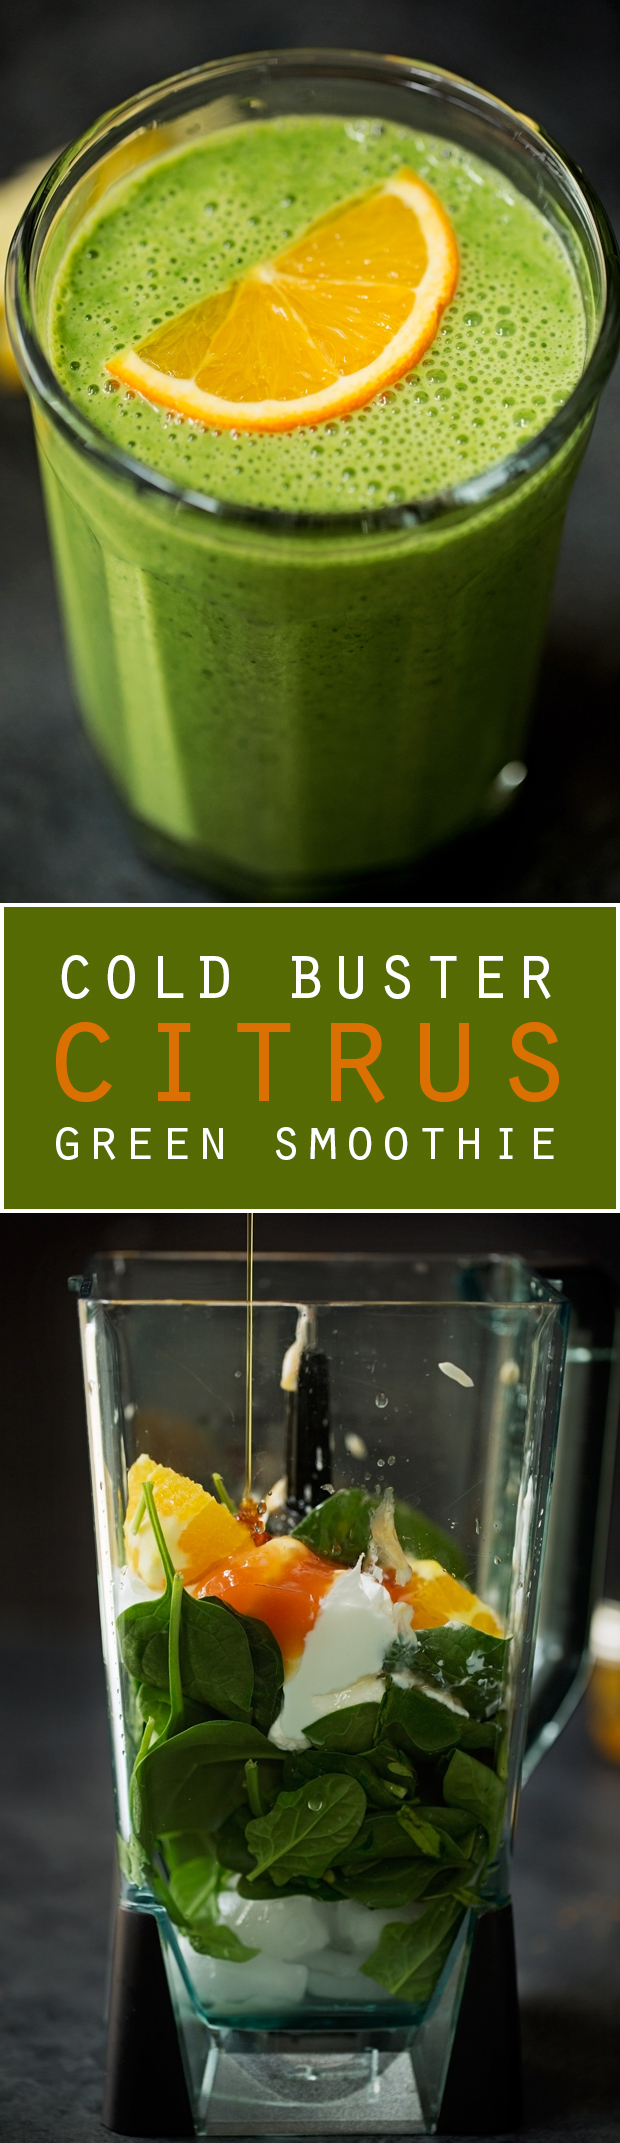 Cold-Buster Citrus Green Smoothie - Loaded with lots of cold fighting ingredients to get you back up on your feet in no time! #greensmoothie #citrusgreensmoothie #coldbustersmoothie | Littlespicejar.com